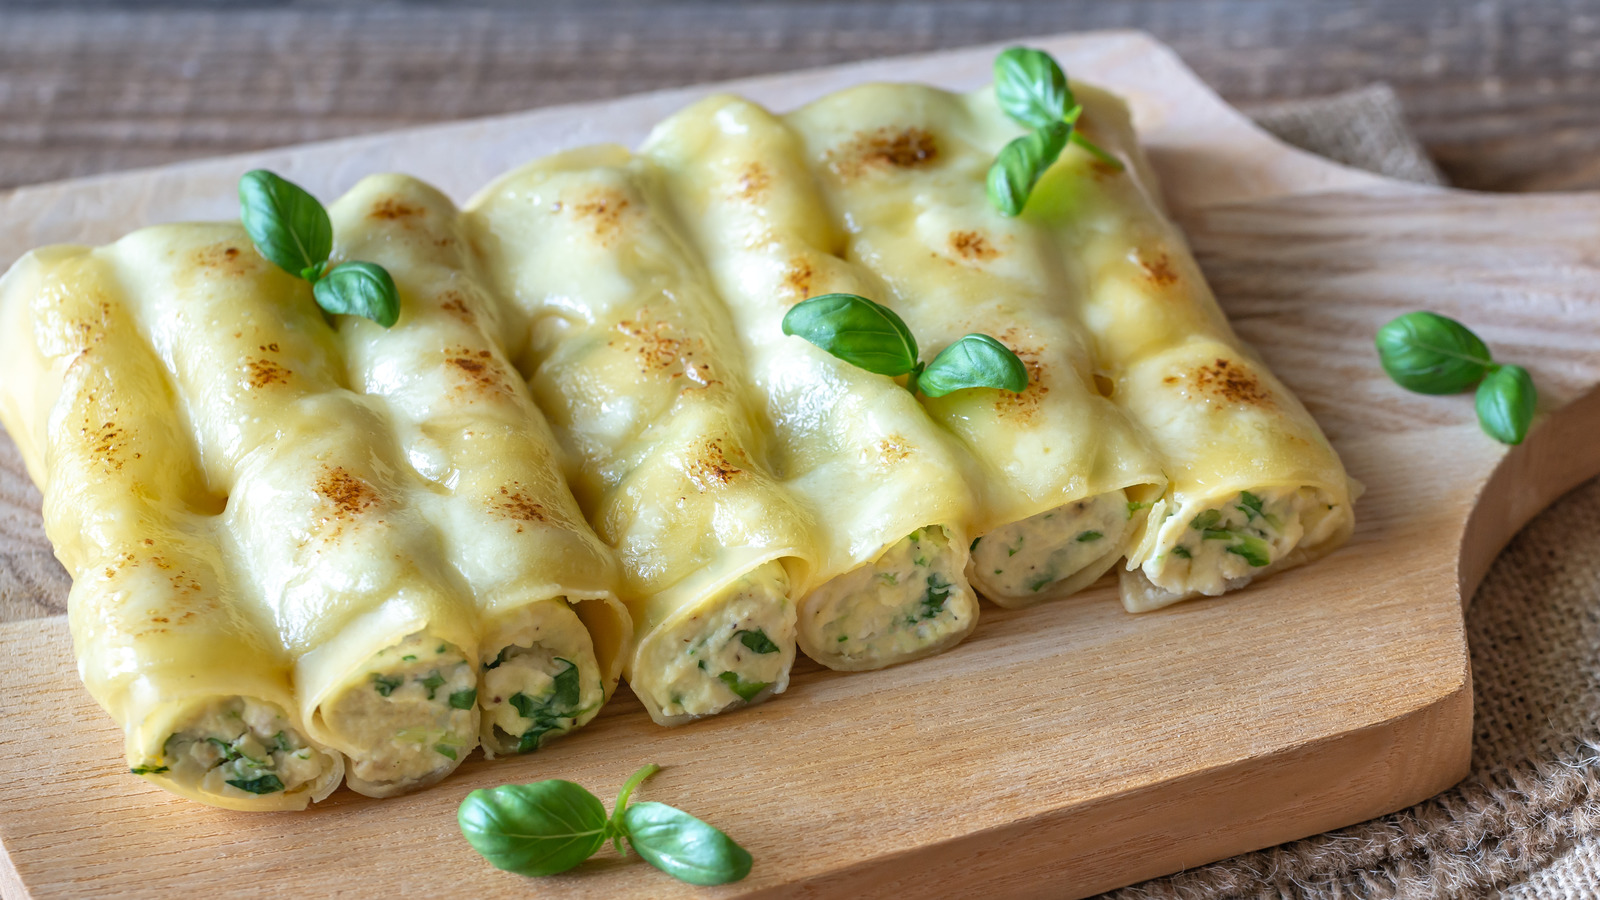 What Is Cannelloni And What Does It Taste Like?